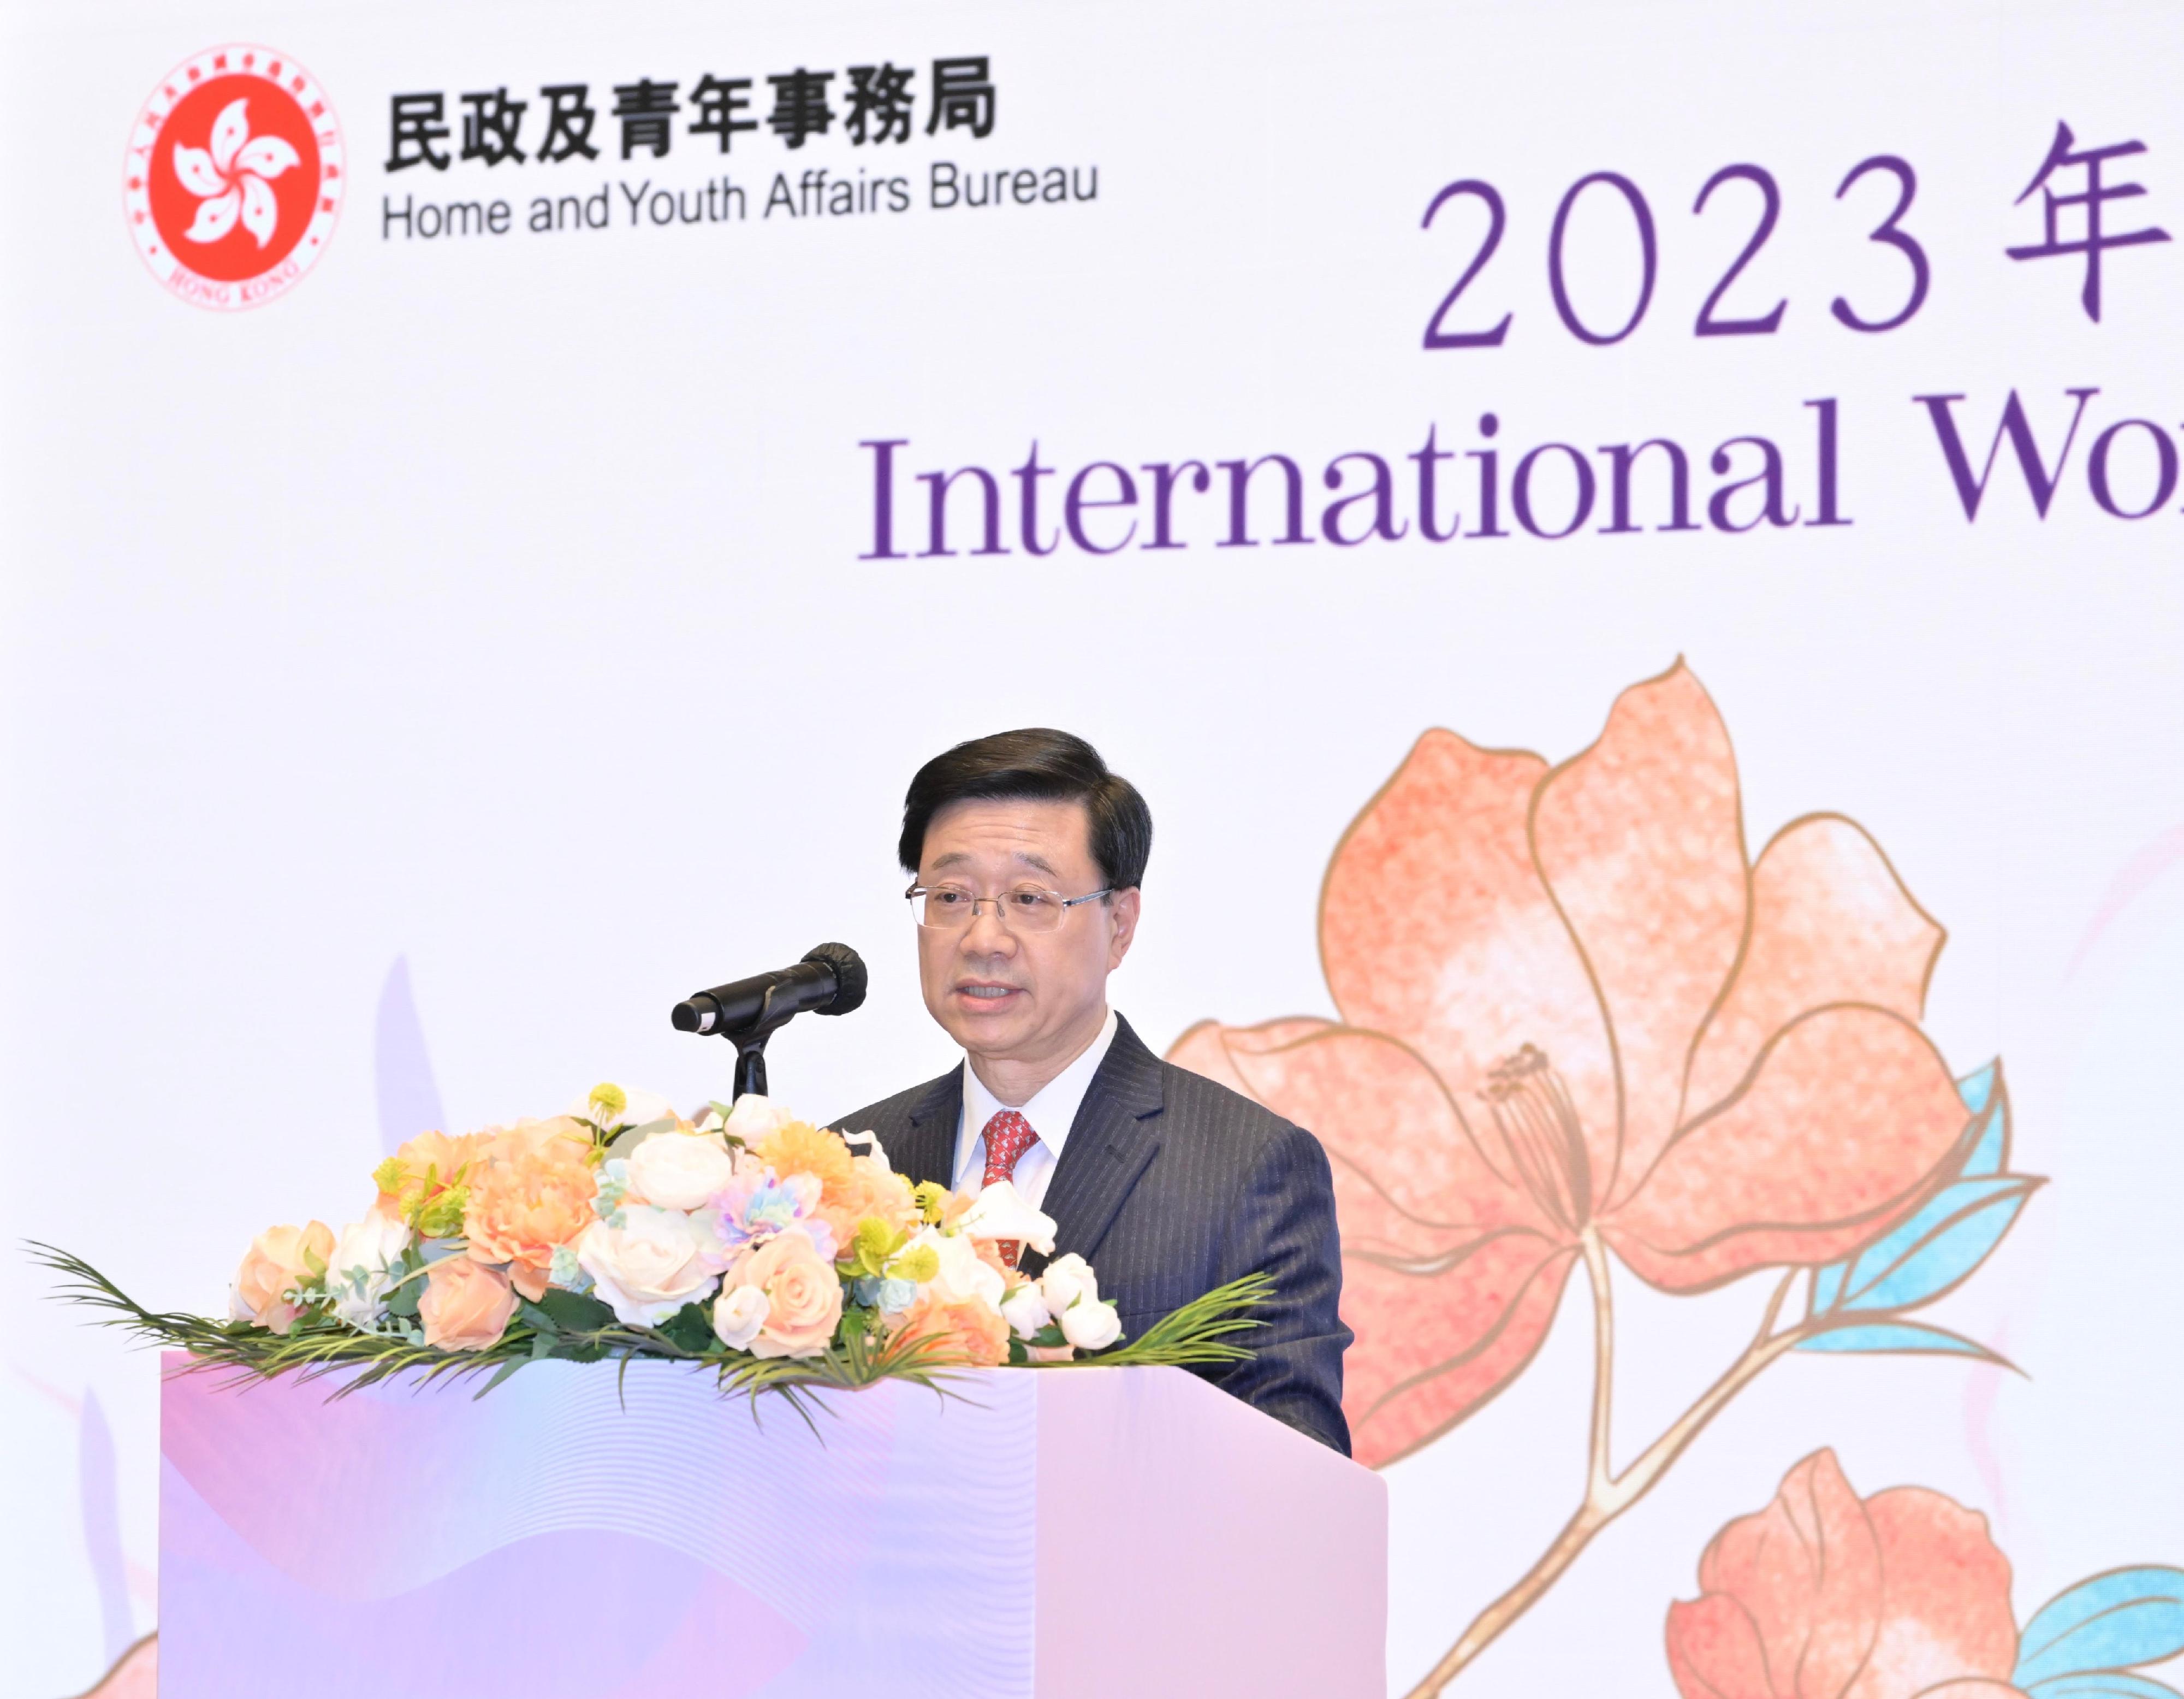 The Chief Executive, Mr John Lee, speaks at the International Women's Day Reception 2023 today (March 8).